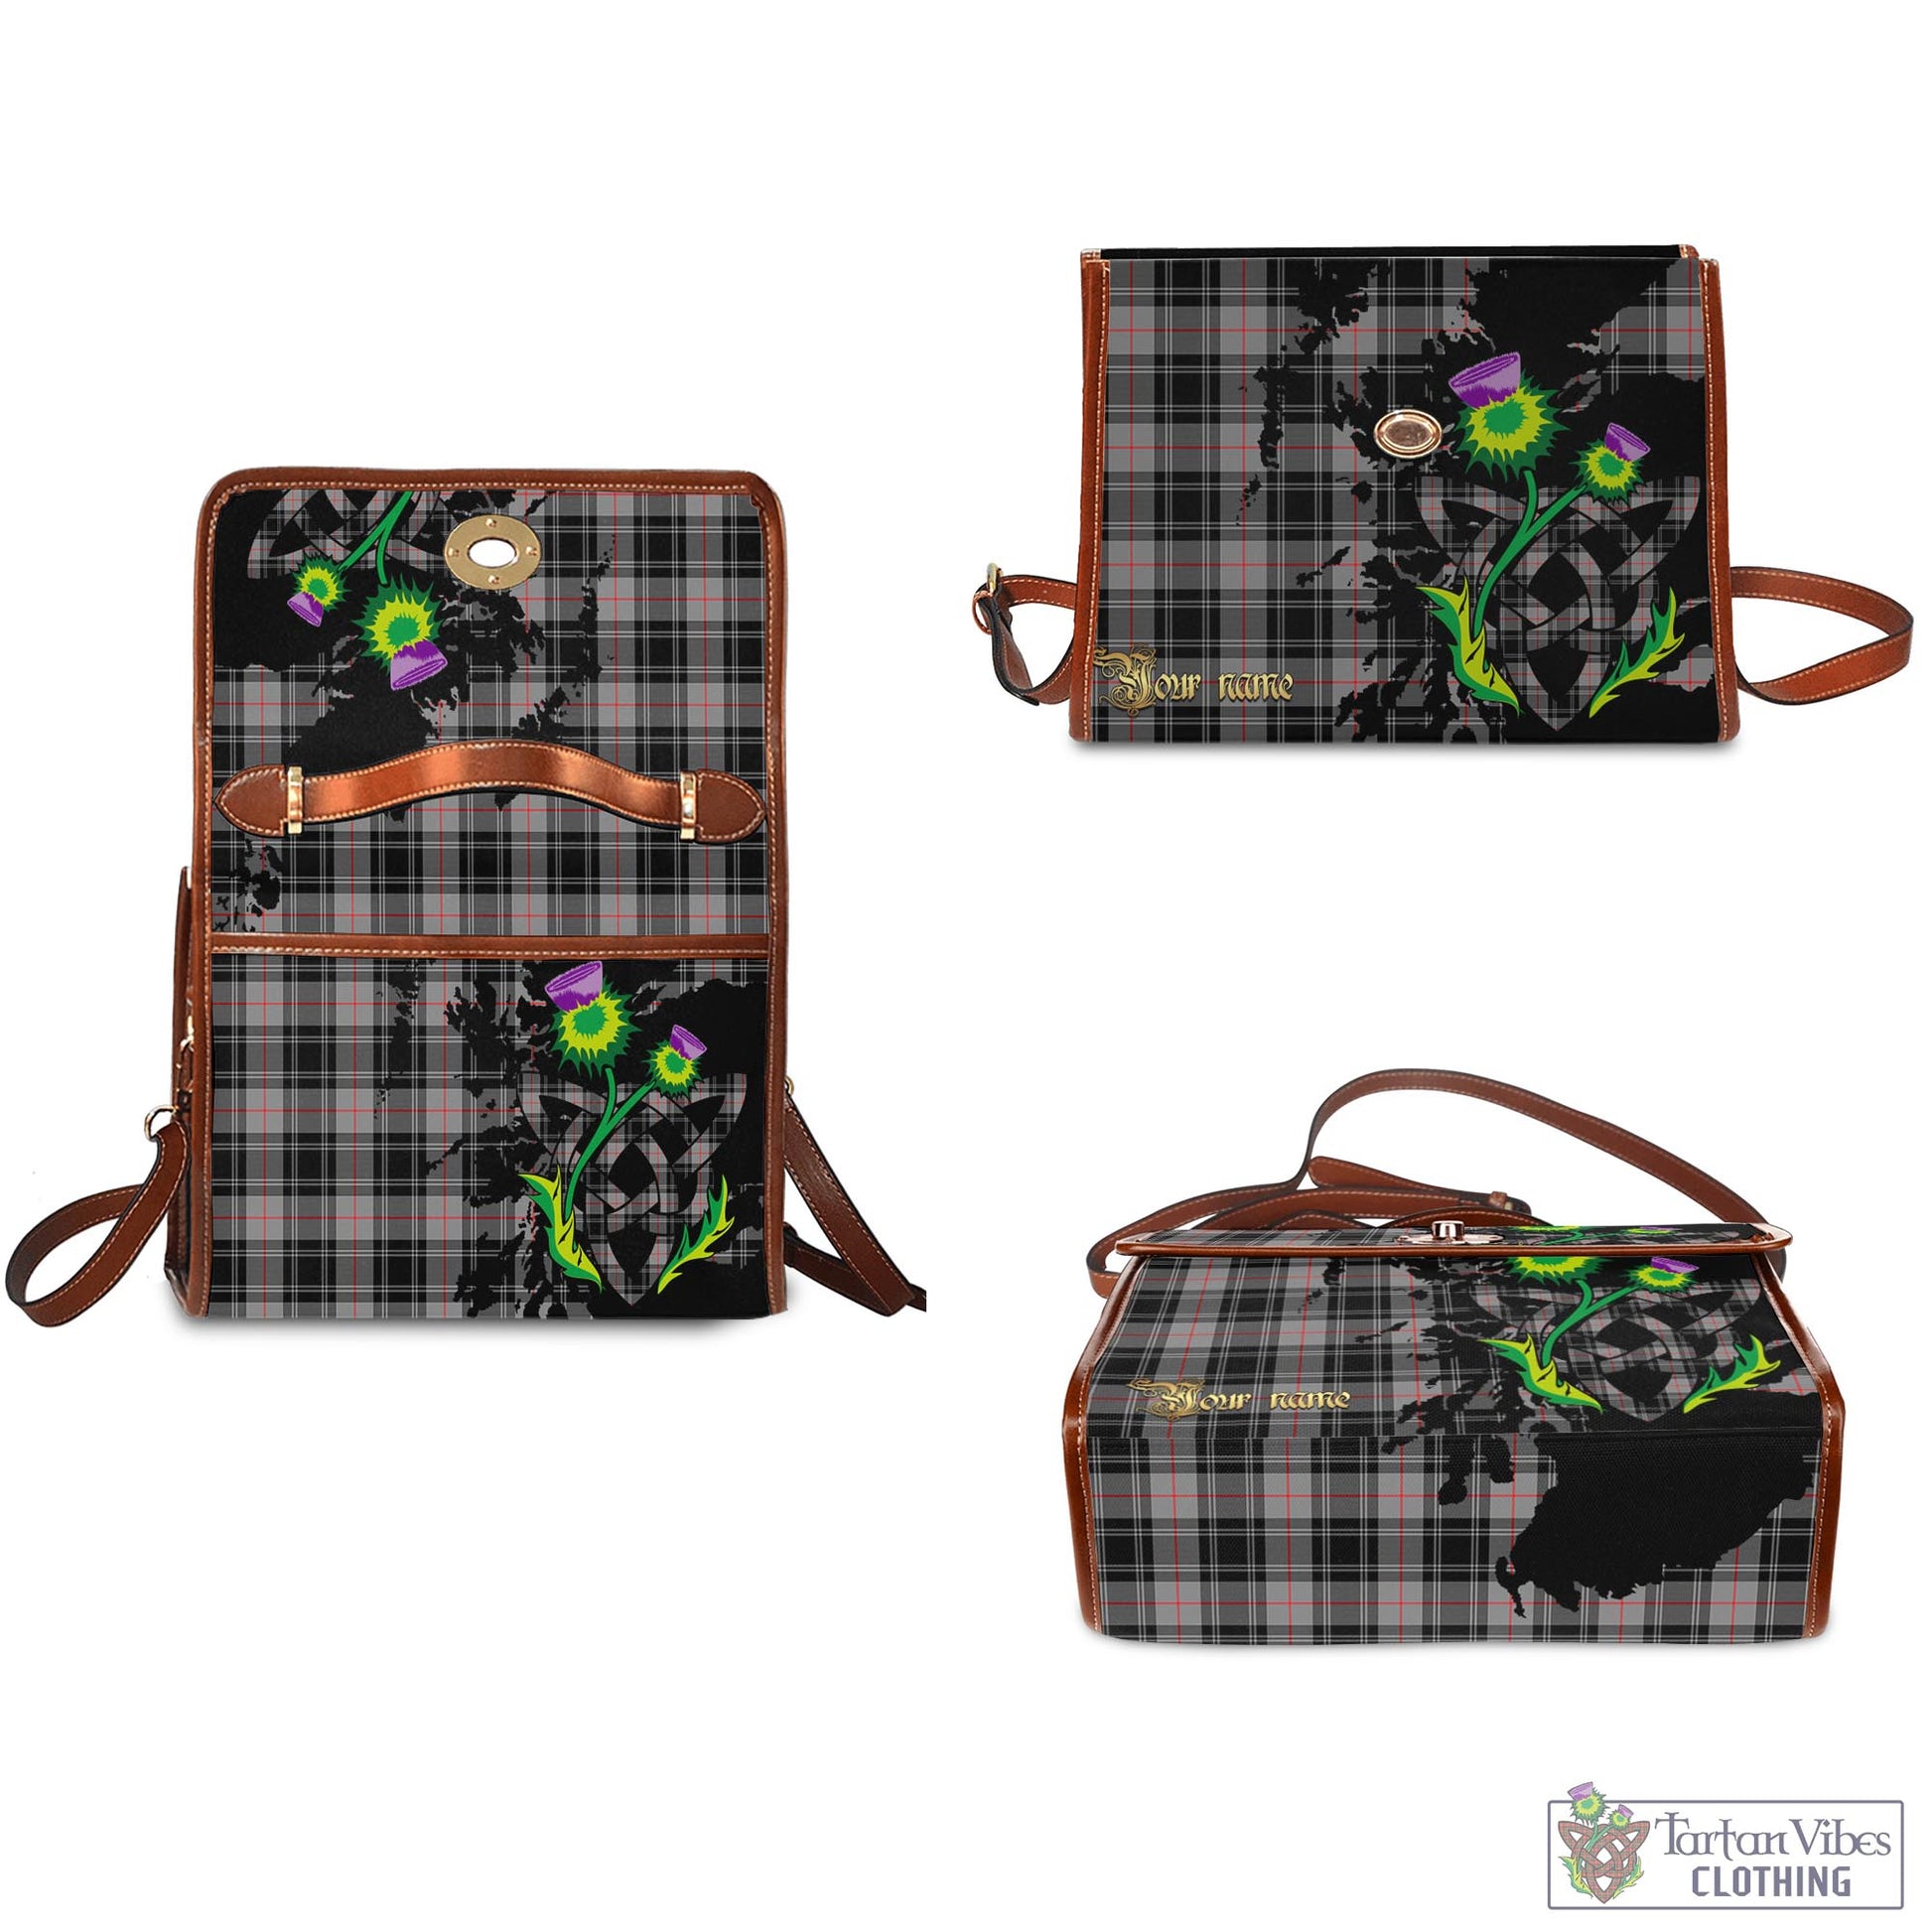 Tartan Vibes Clothing Moffat Modern Tartan Waterproof Canvas Bag with Scotland Map and Thistle Celtic Accents